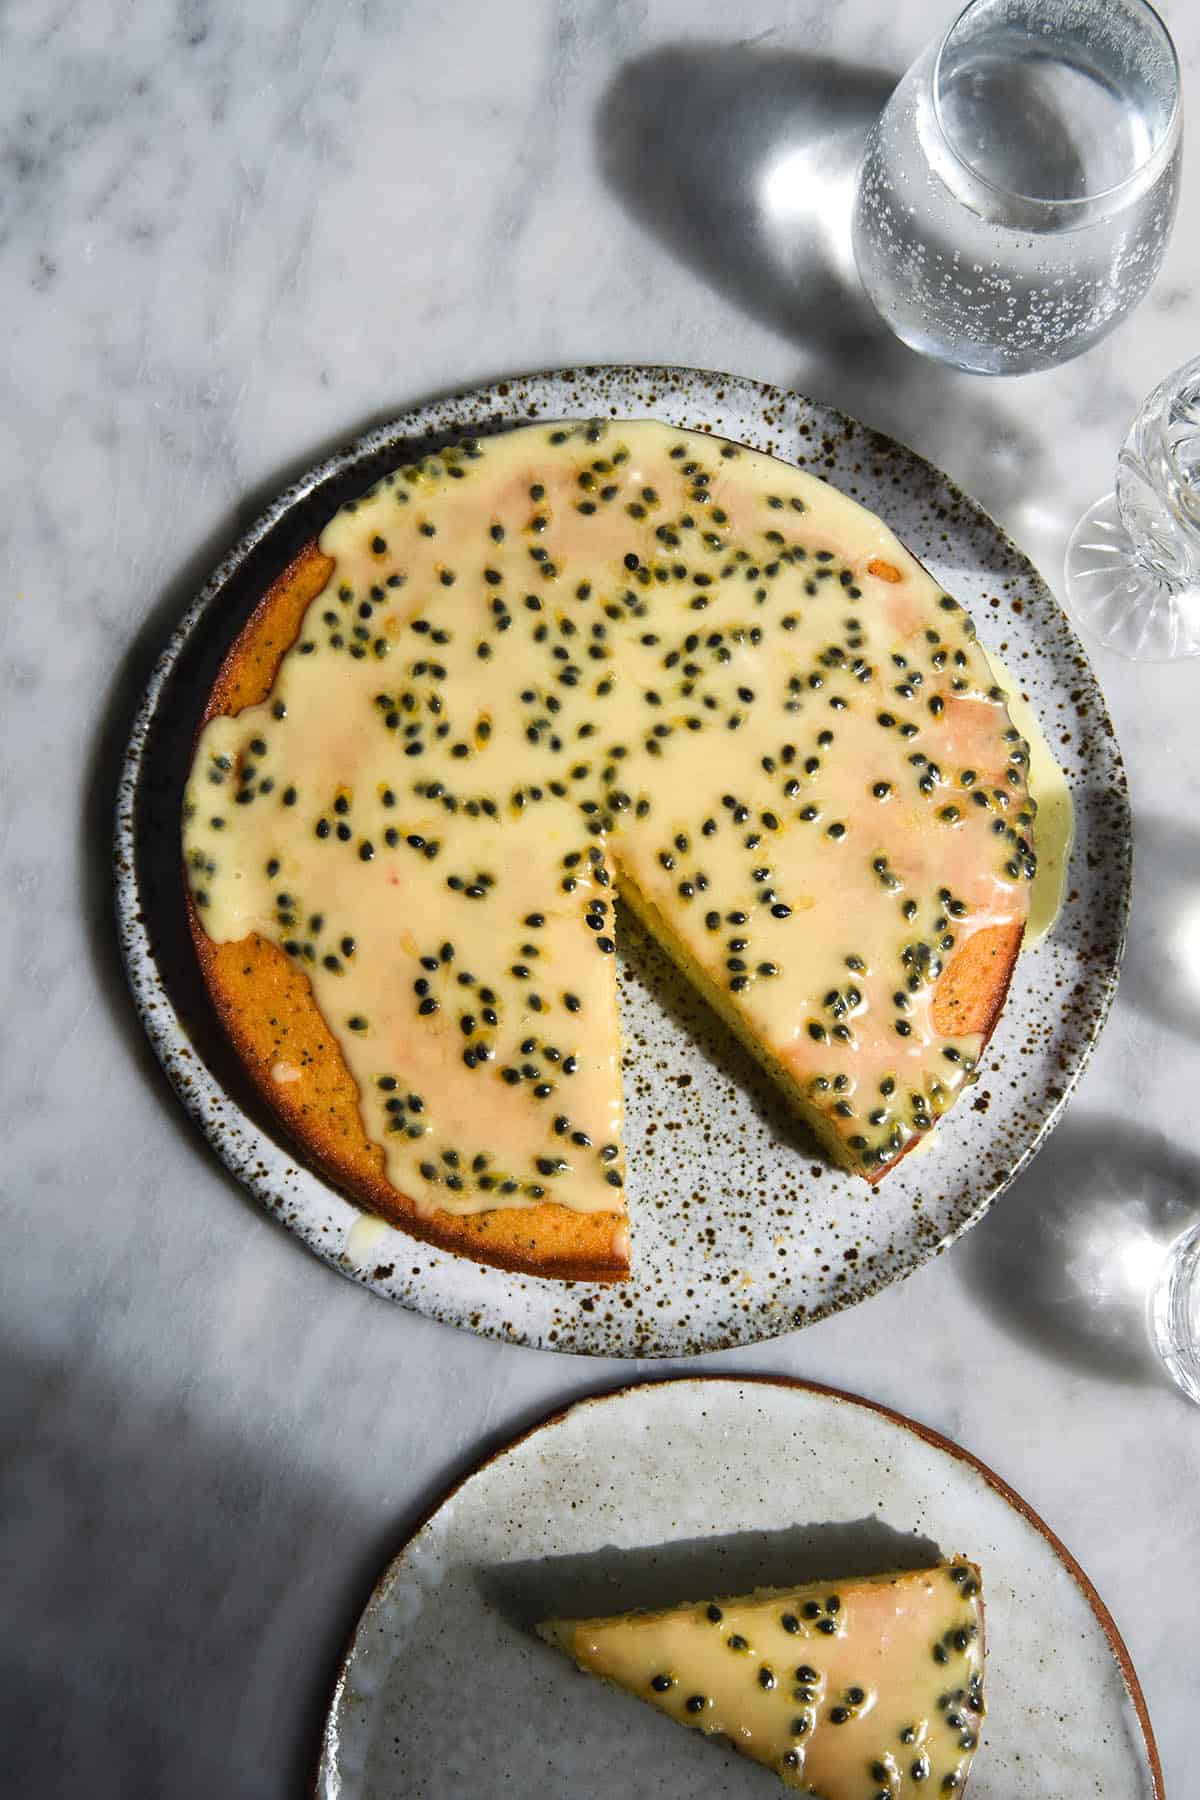 An aerial view of an easy gluten free vanilla cake topped with passionfruit icing. The cake sits atop a white marble table in harsh sunlight and is surrounded by glasses of water and a white ceramic plate with a slice of cake